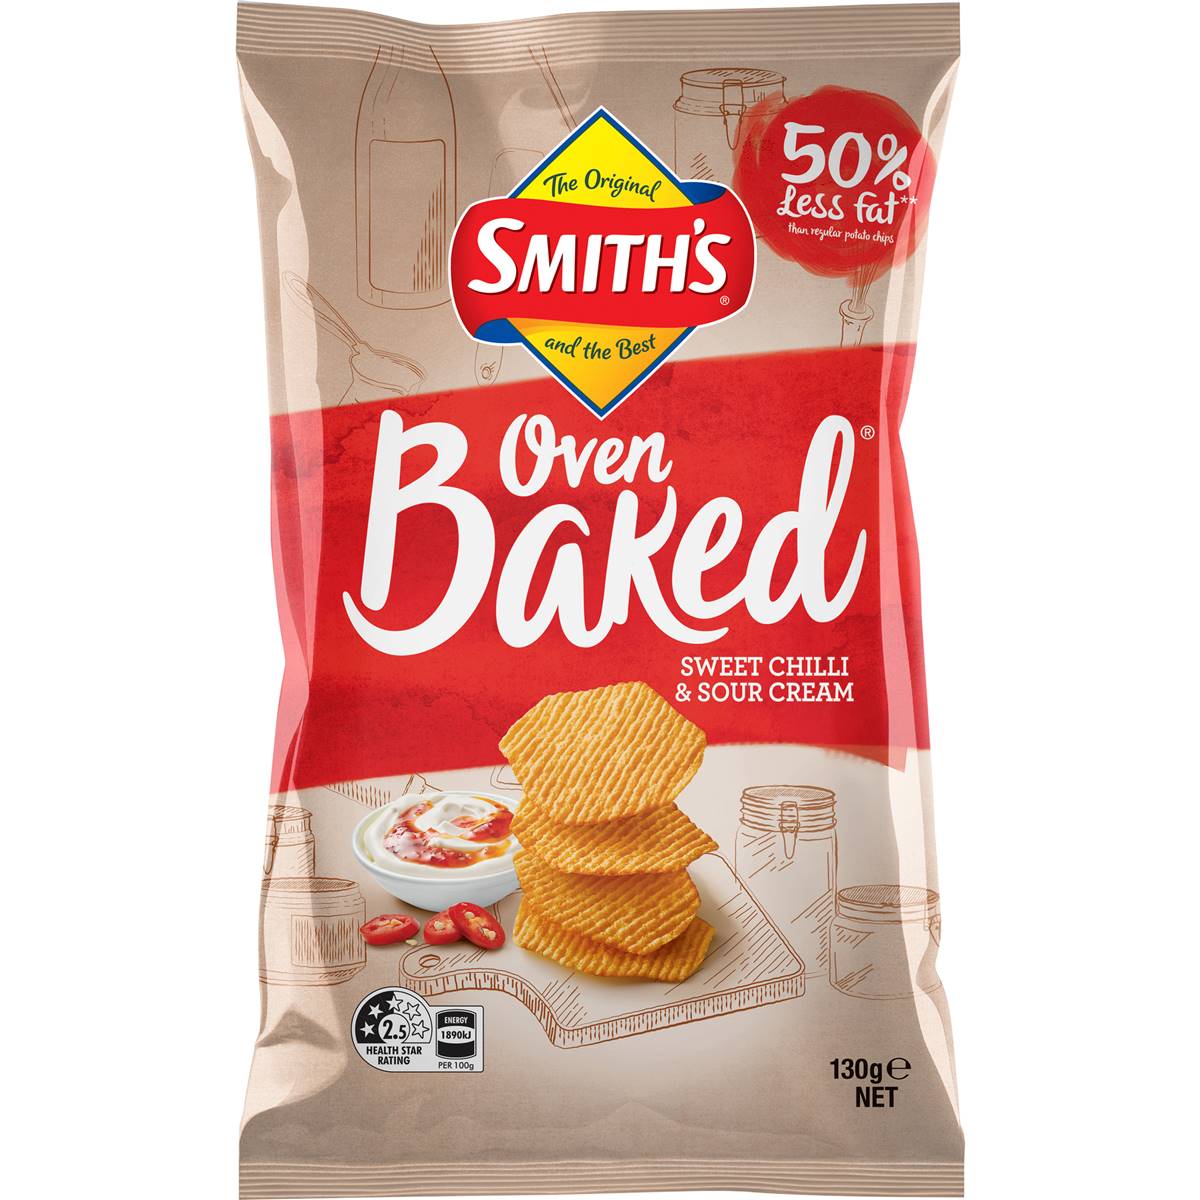 Calories in Smith's Oven Baked Chips Sweet Chilli & Sour Cream